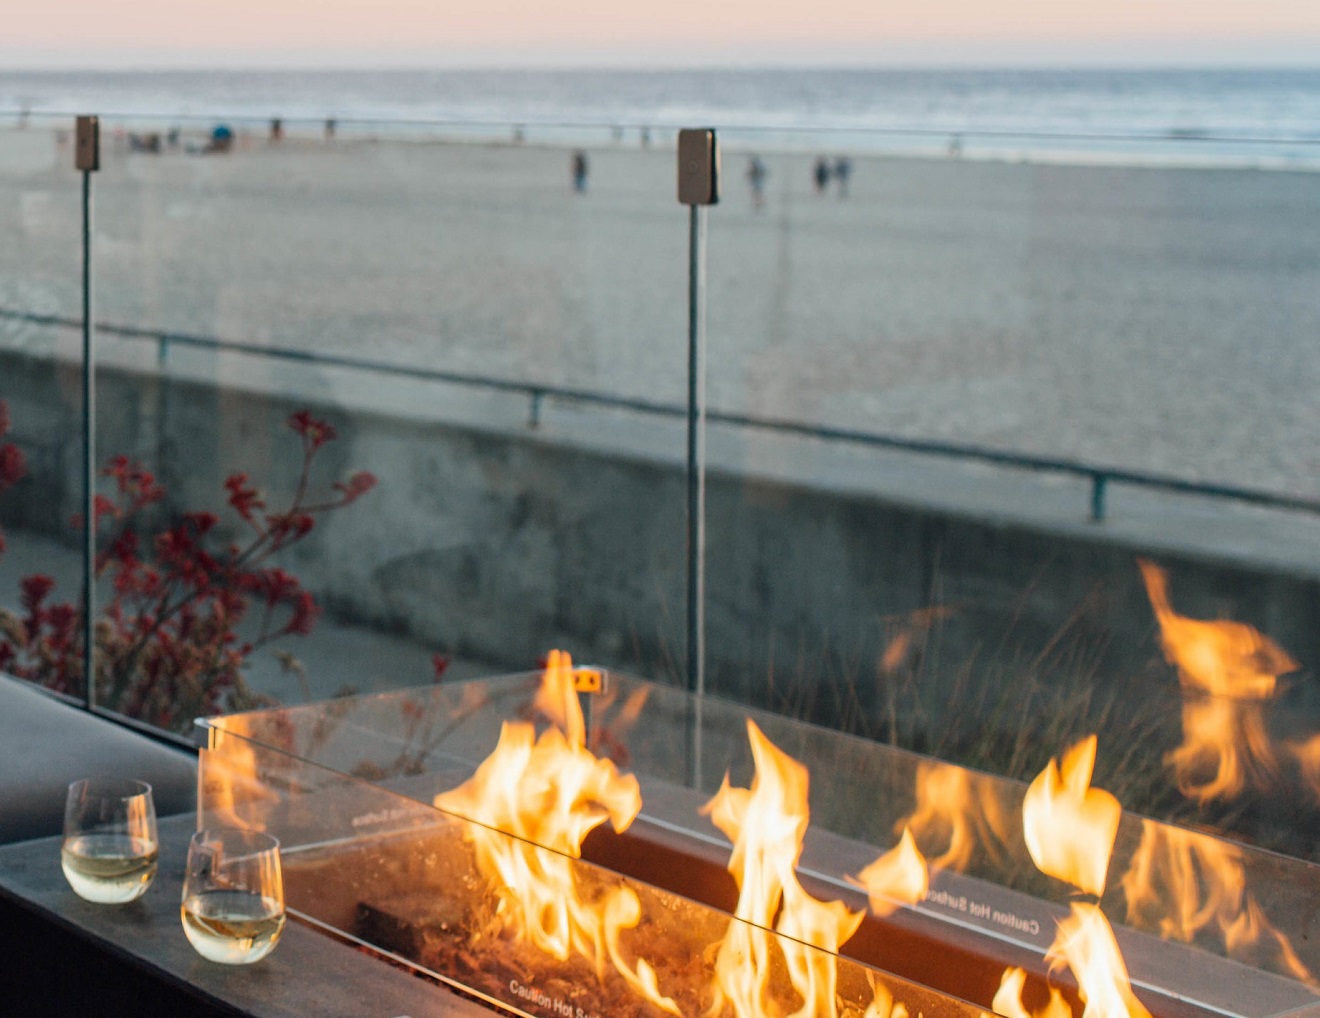 Fire pit by Pismo beach with two glasses of wine